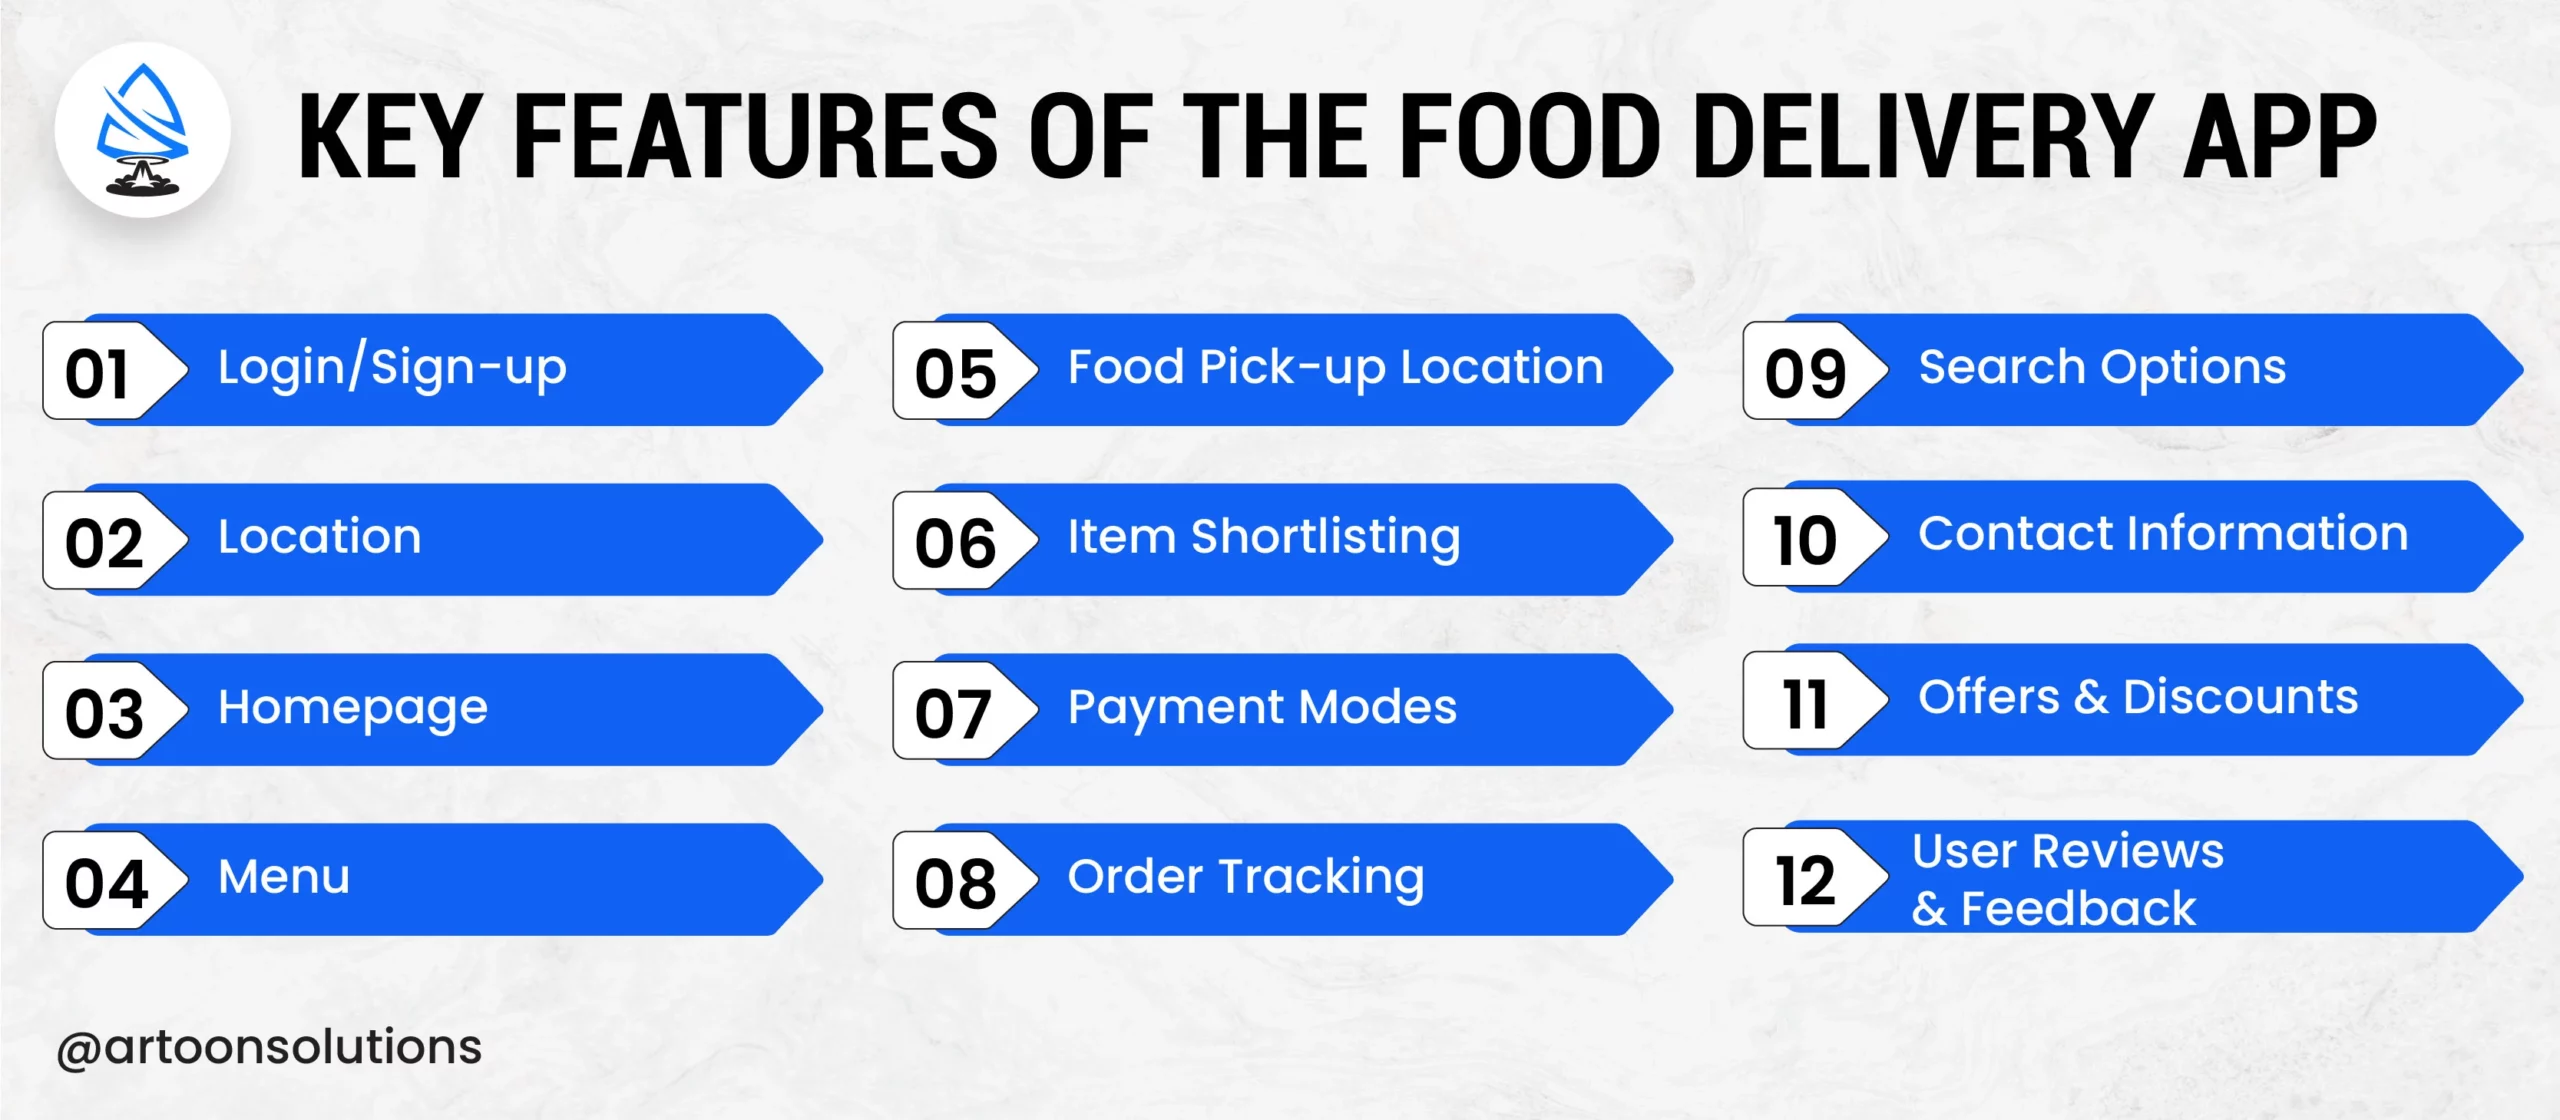 3. KEY FEATURES OF THE FOOD DELIVERY APP